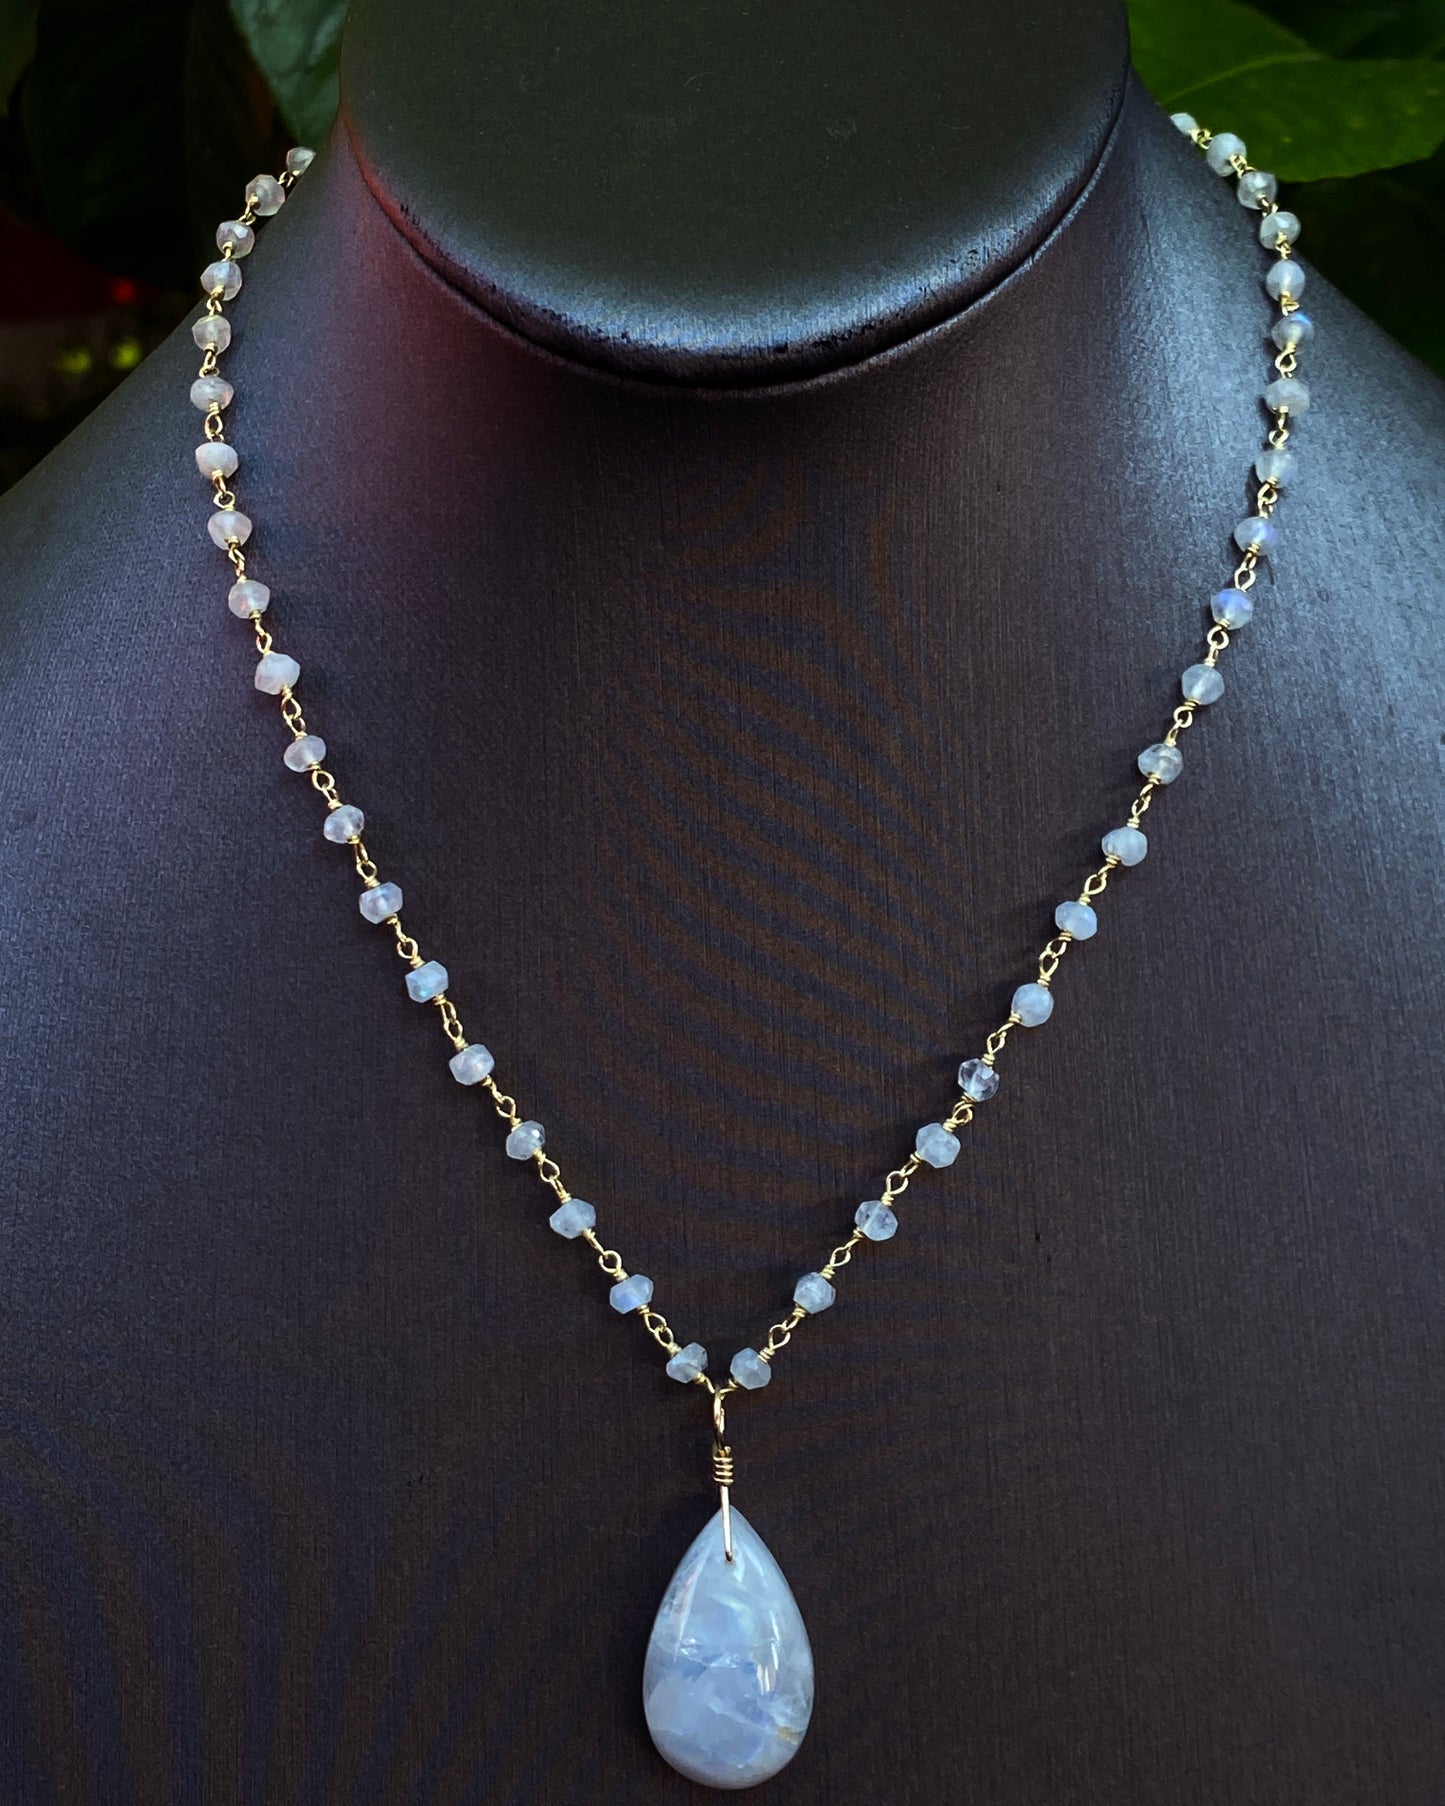 Genuine Moonstone gemstone pendant on gold fill chain Necklace